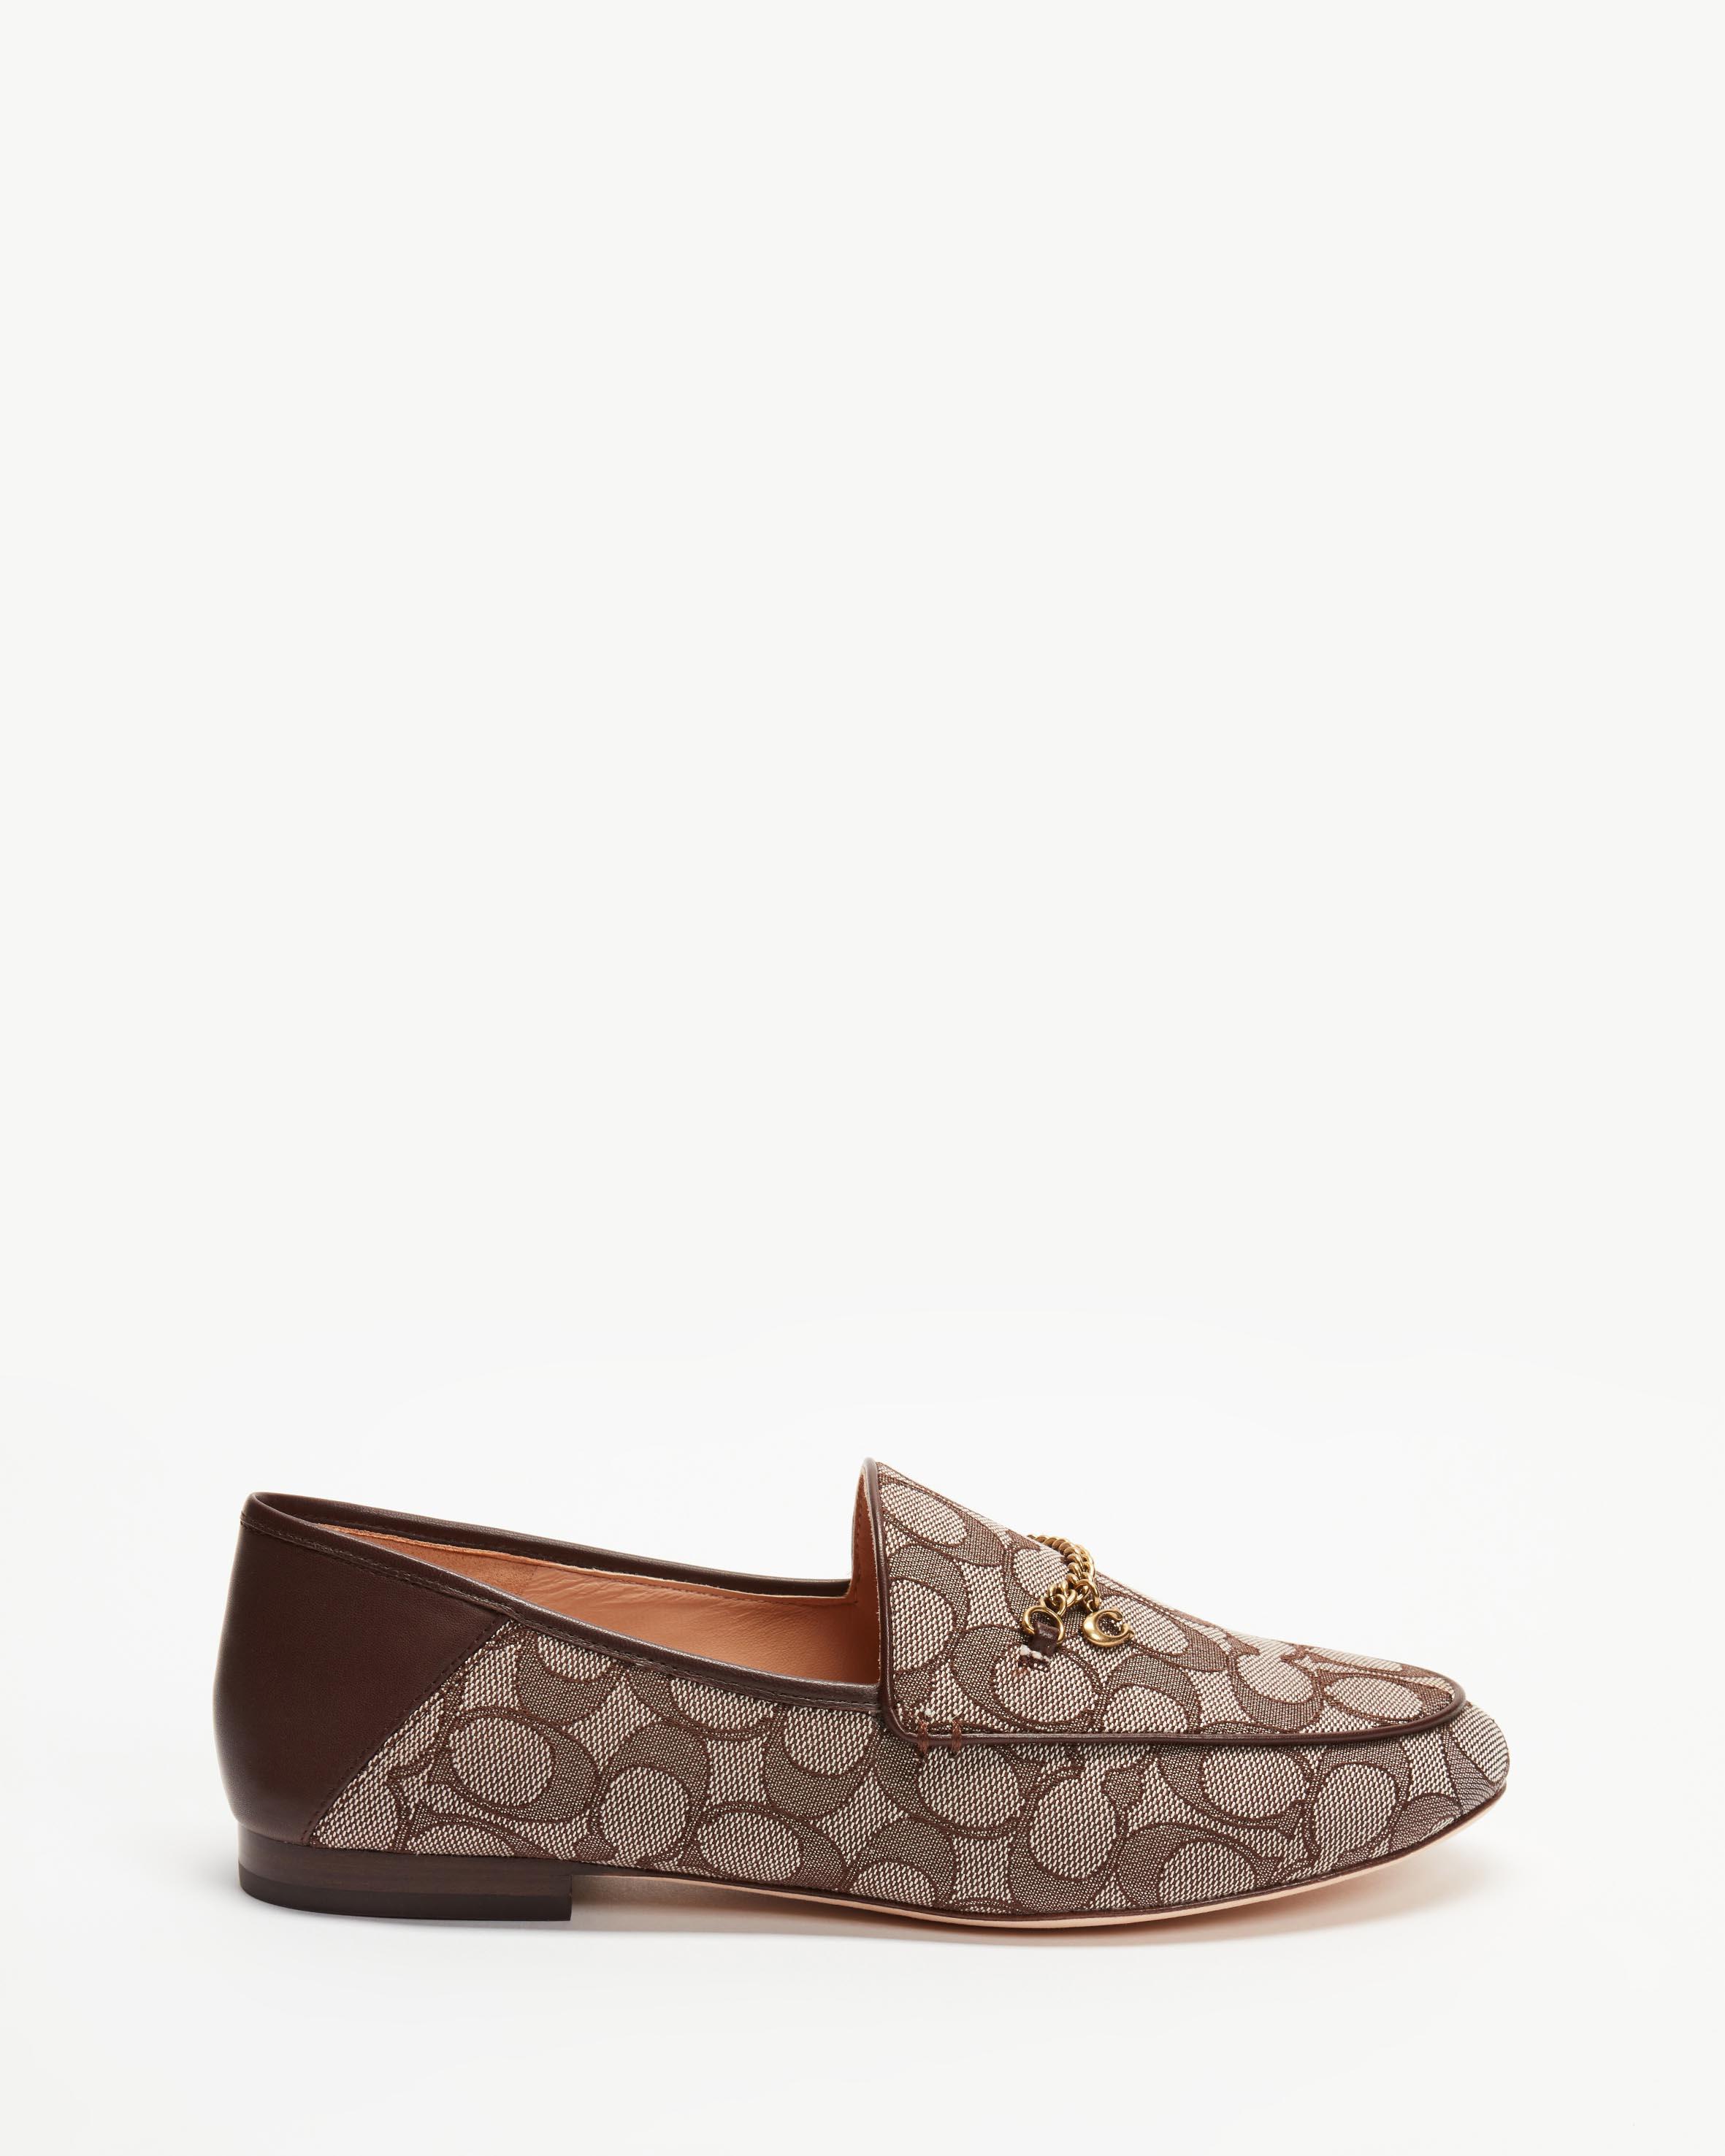 COACH Hanna Signature Jacquard Loafers in Brown | Lyst Australia